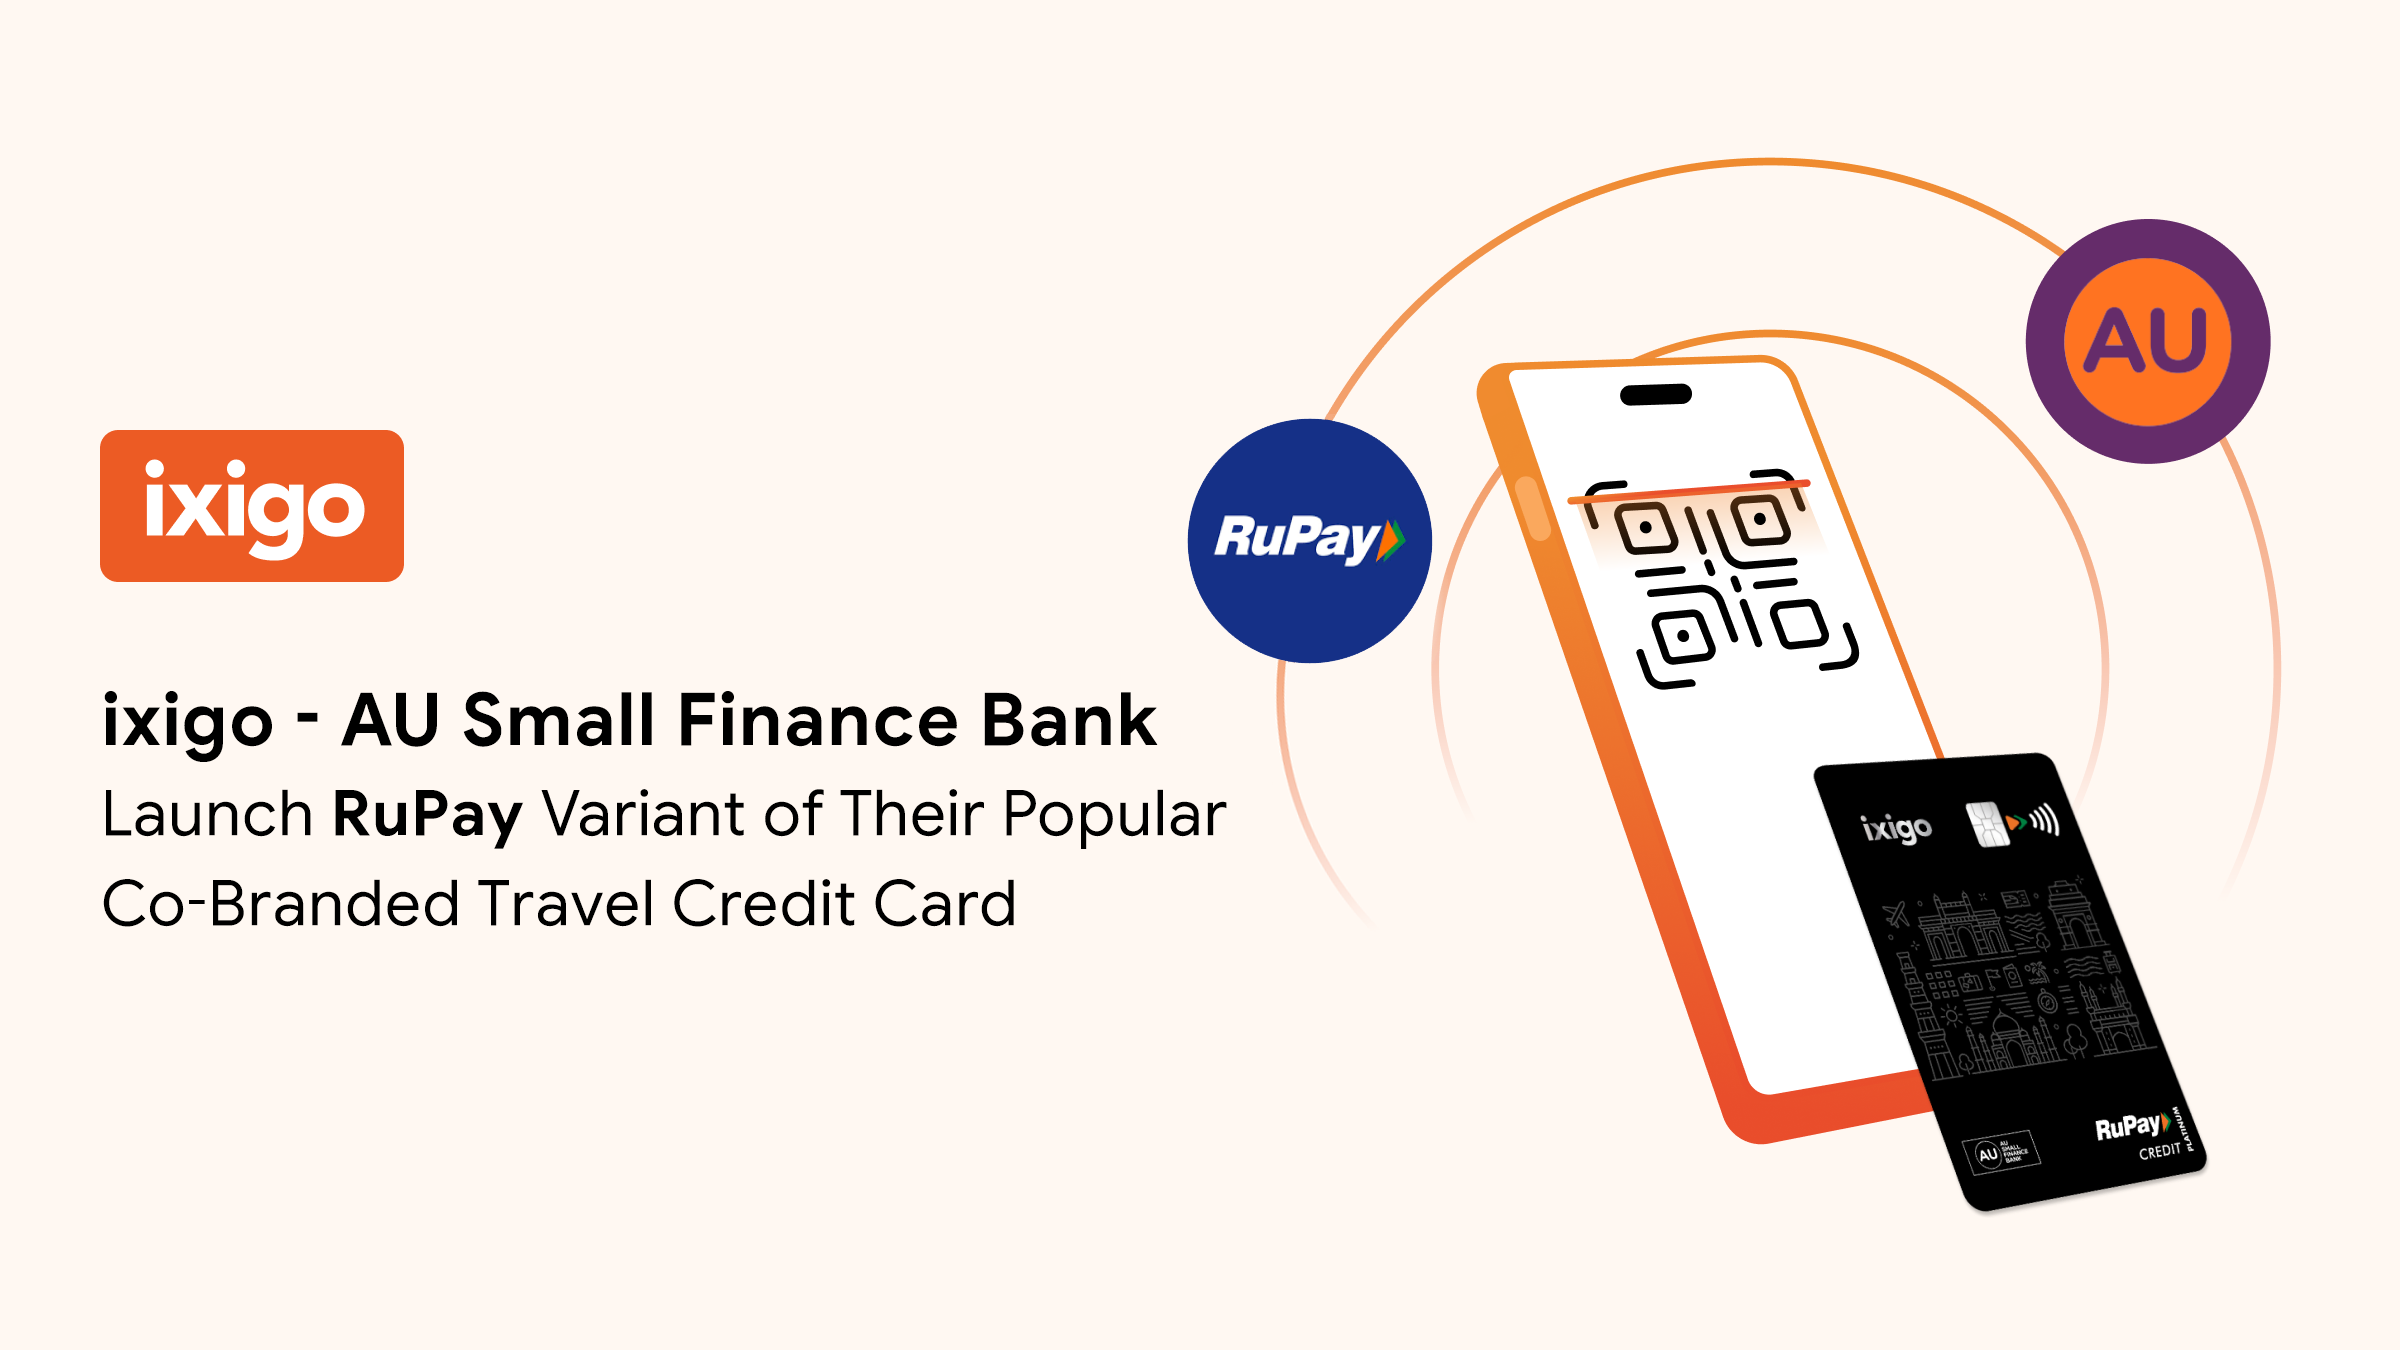 ixigo, AU Small Finance Bank launch RuPay variant of co-branded credit card